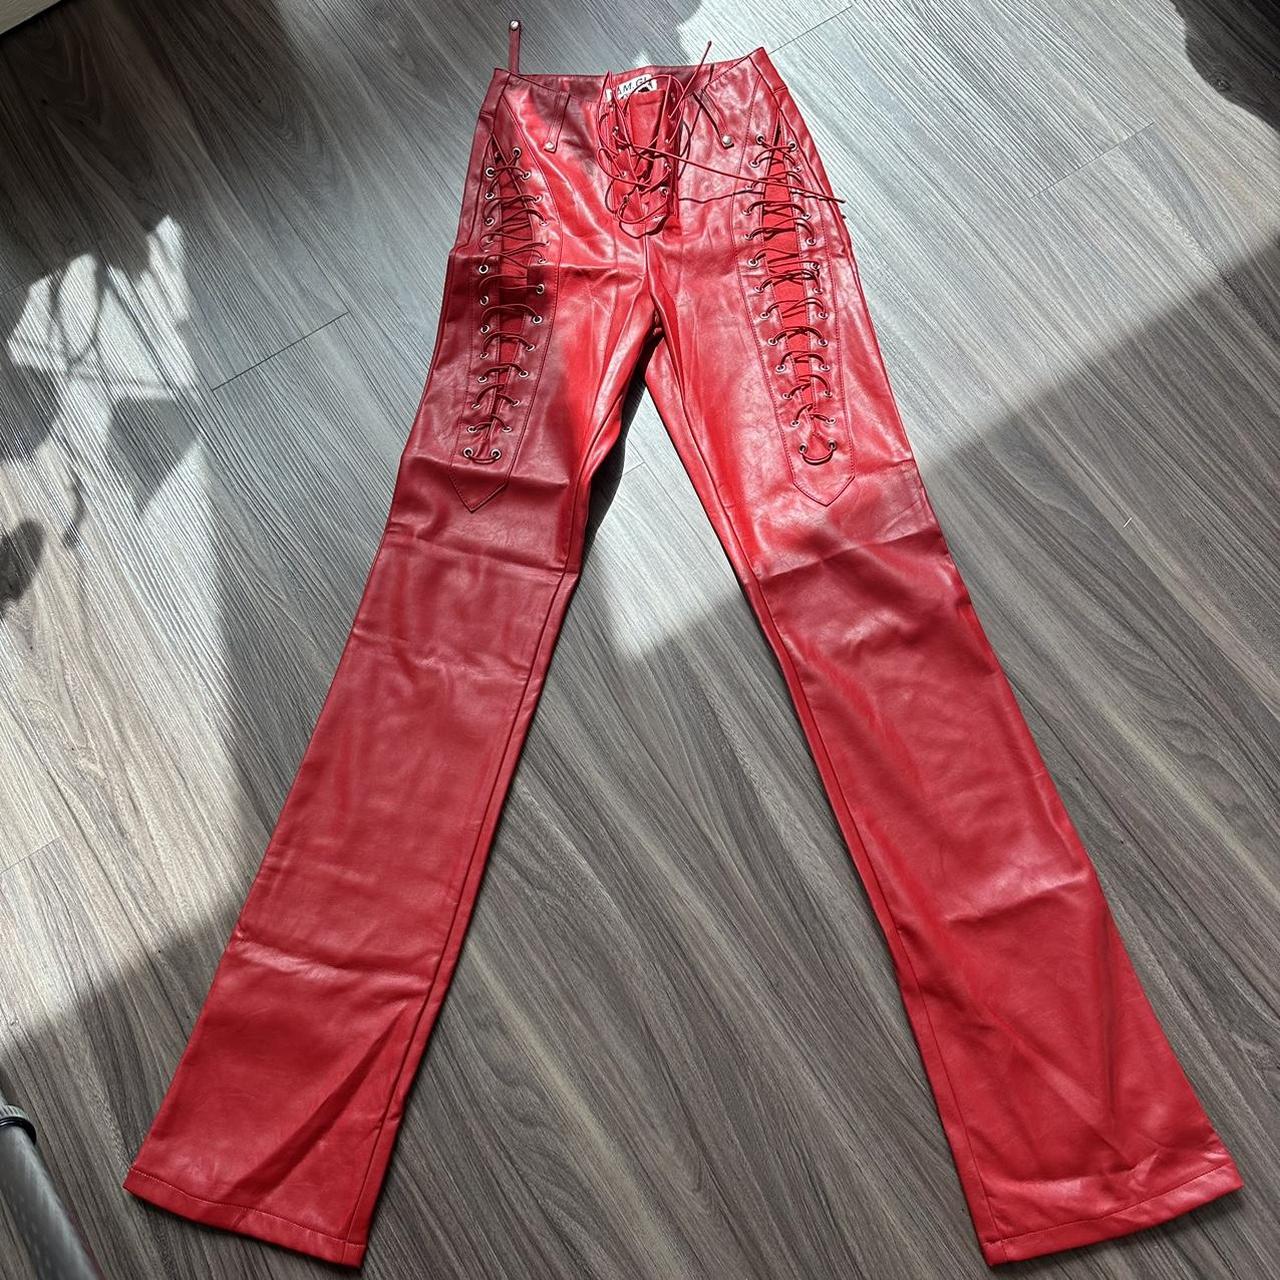 Size large, red Love pink pants from Victoria's - Depop